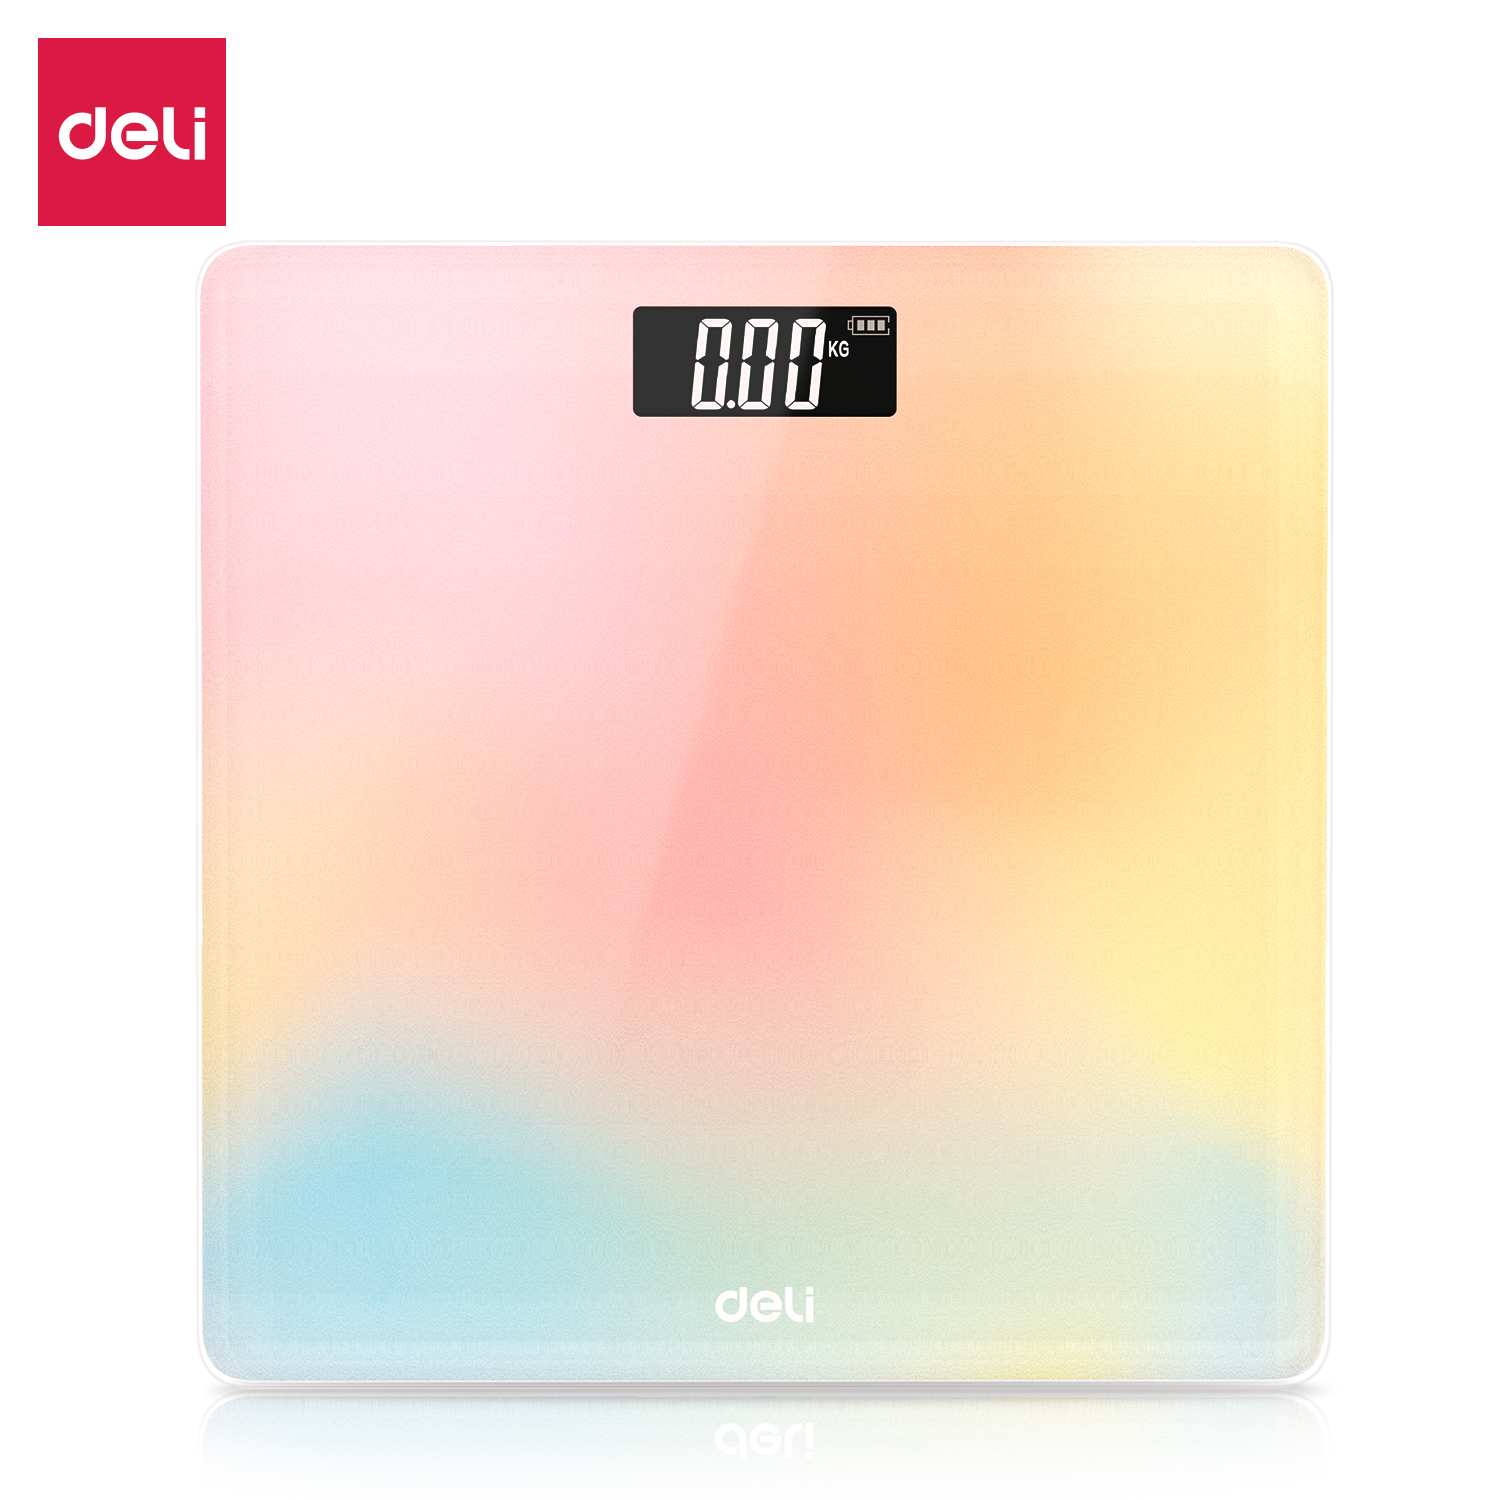 Deli-E86120 Weighing Scale